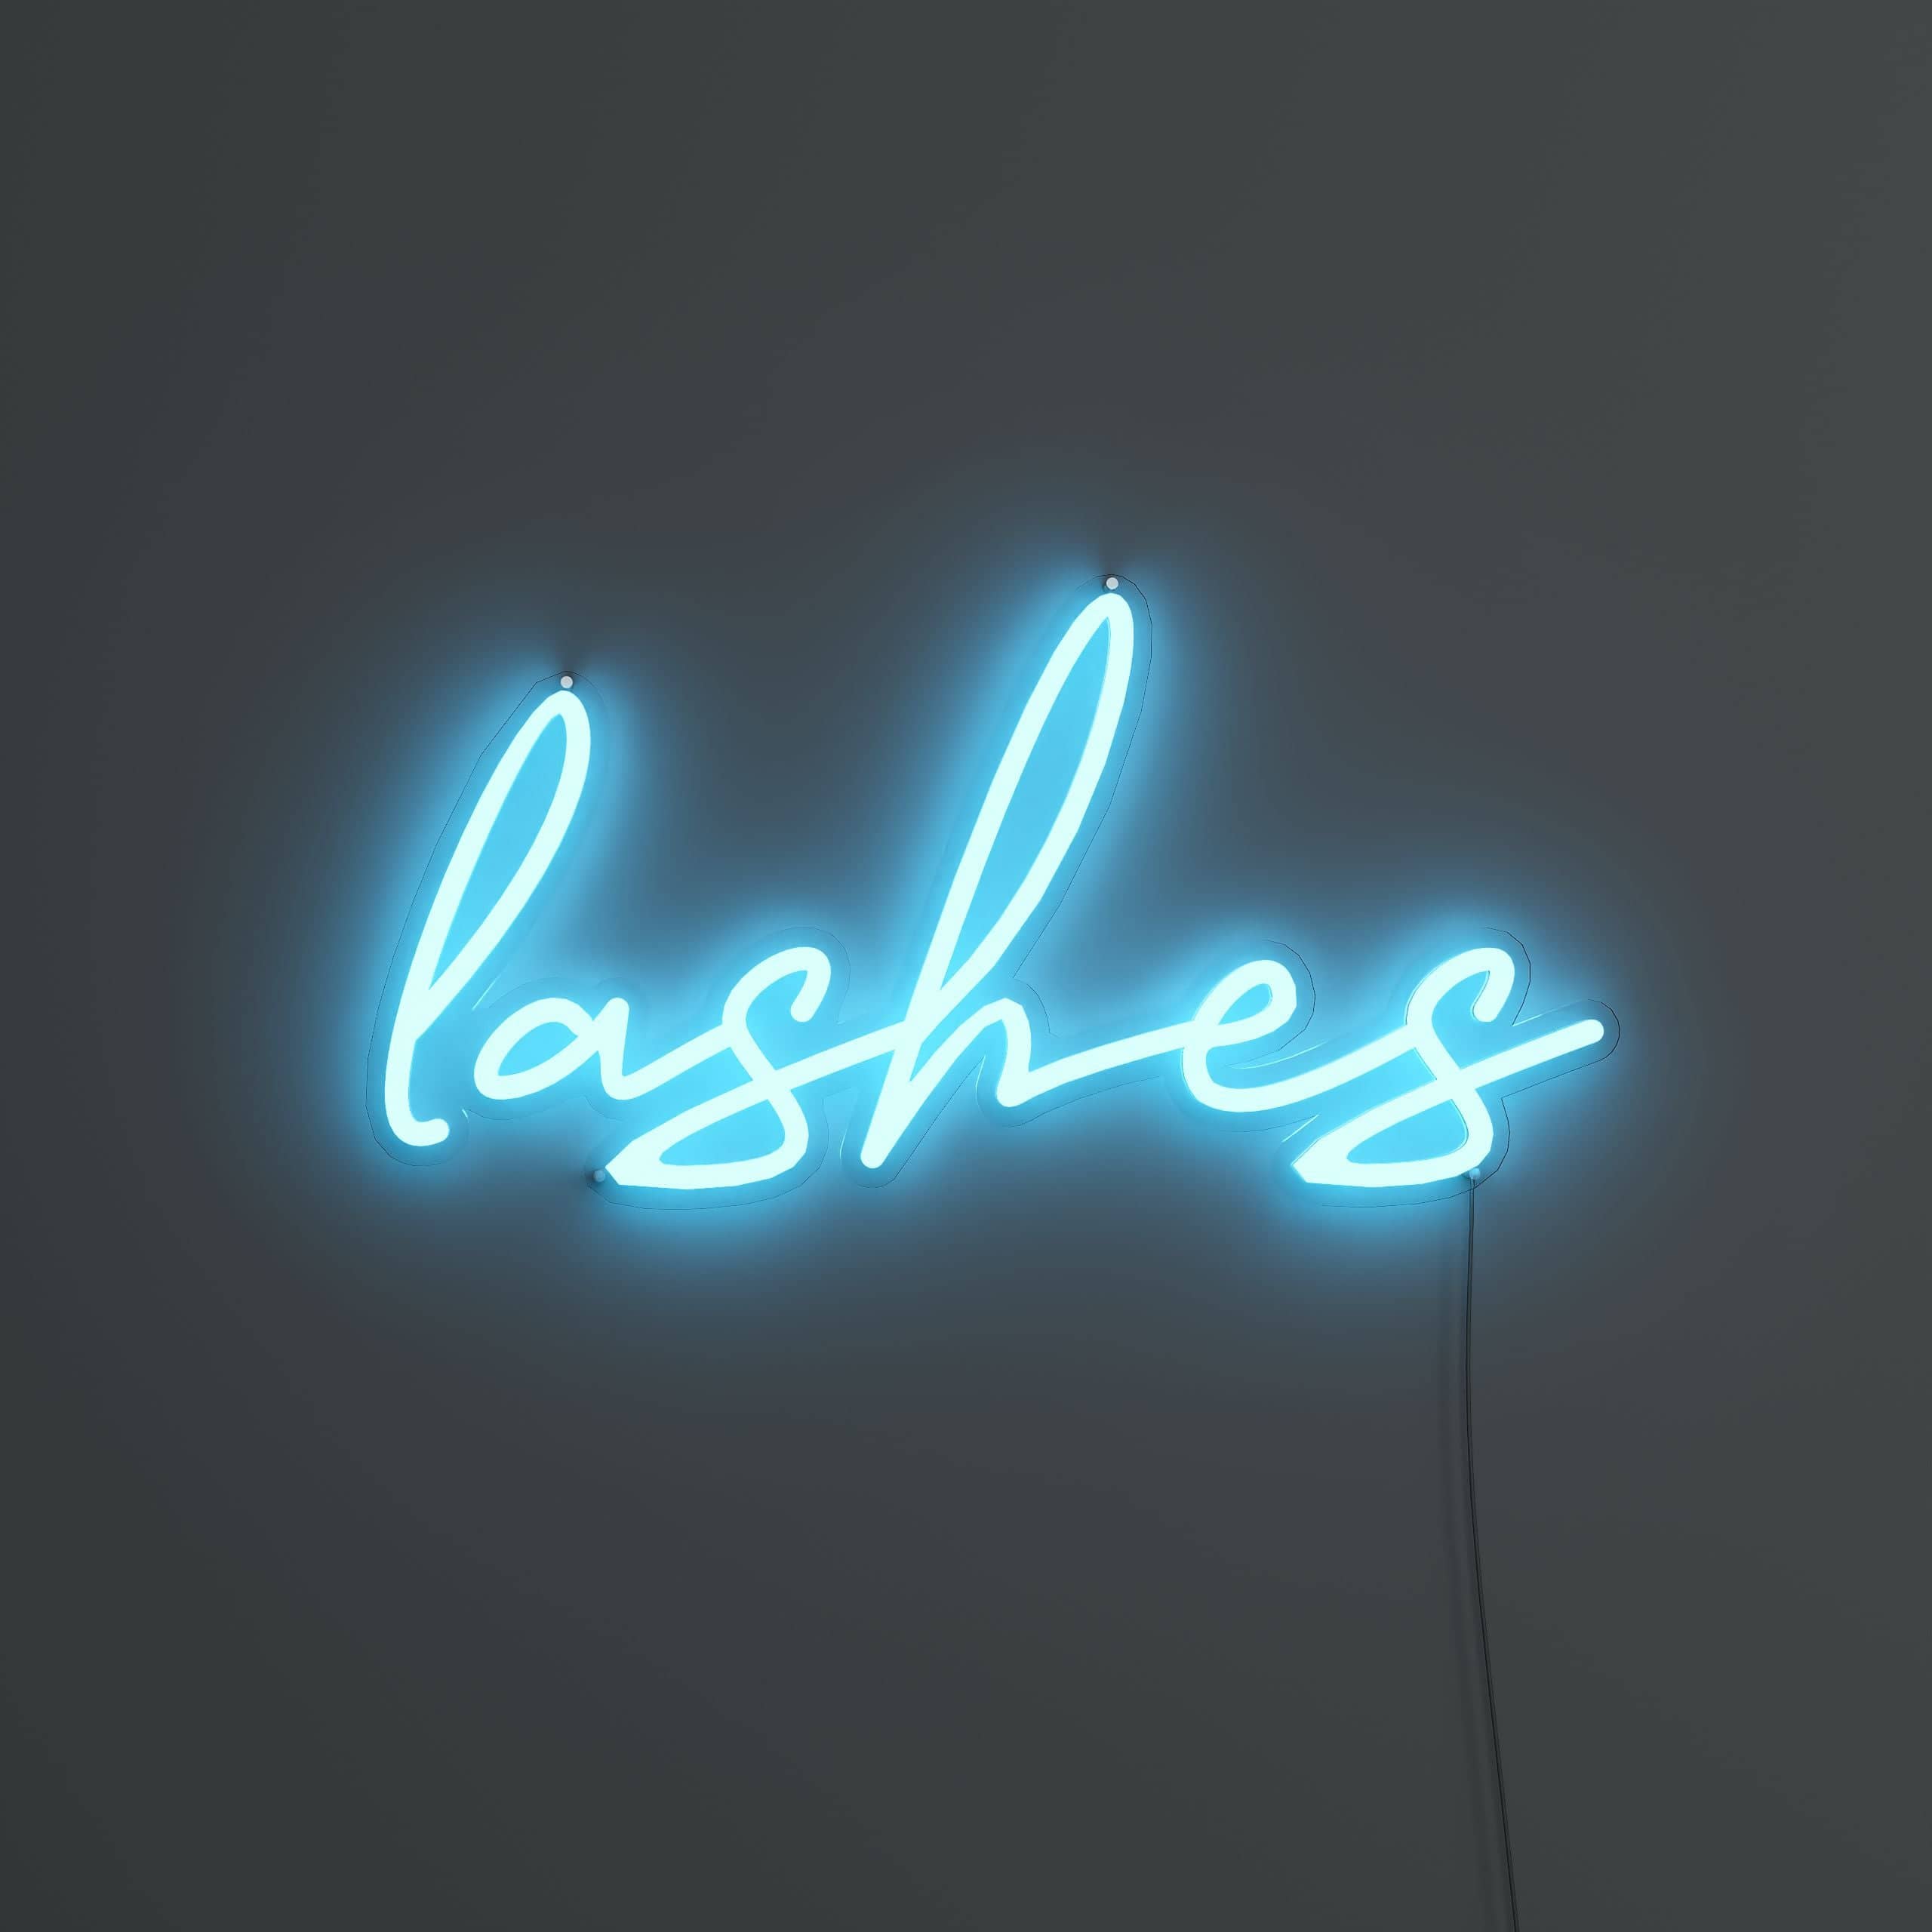 emphasize-your-gaze-with-stunning-lashes!-neon-sign-lite